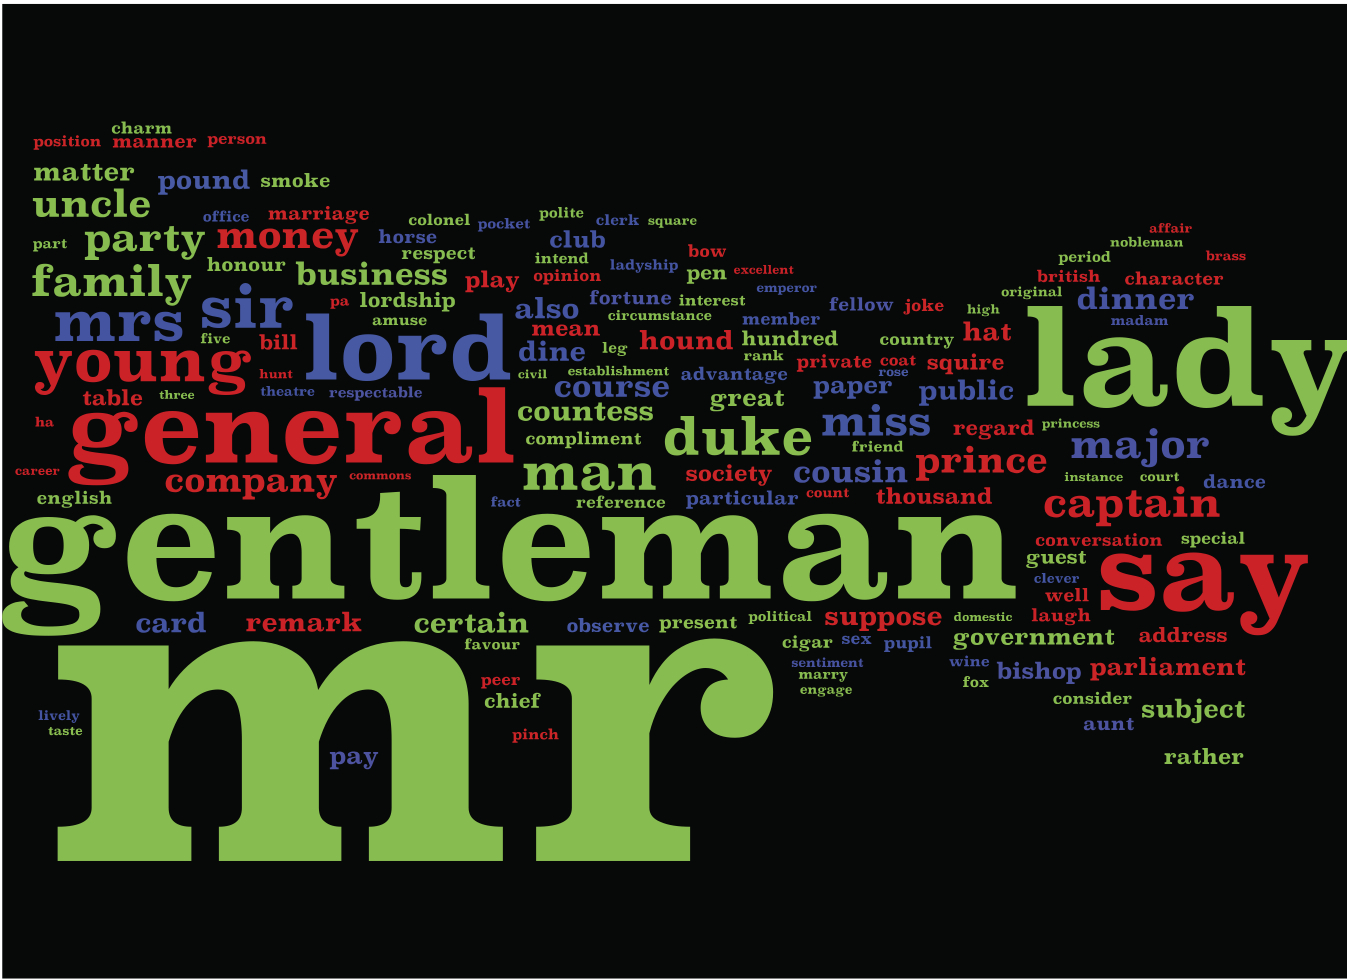 Visualisation of Words Under-Represented in Sentimental Texts